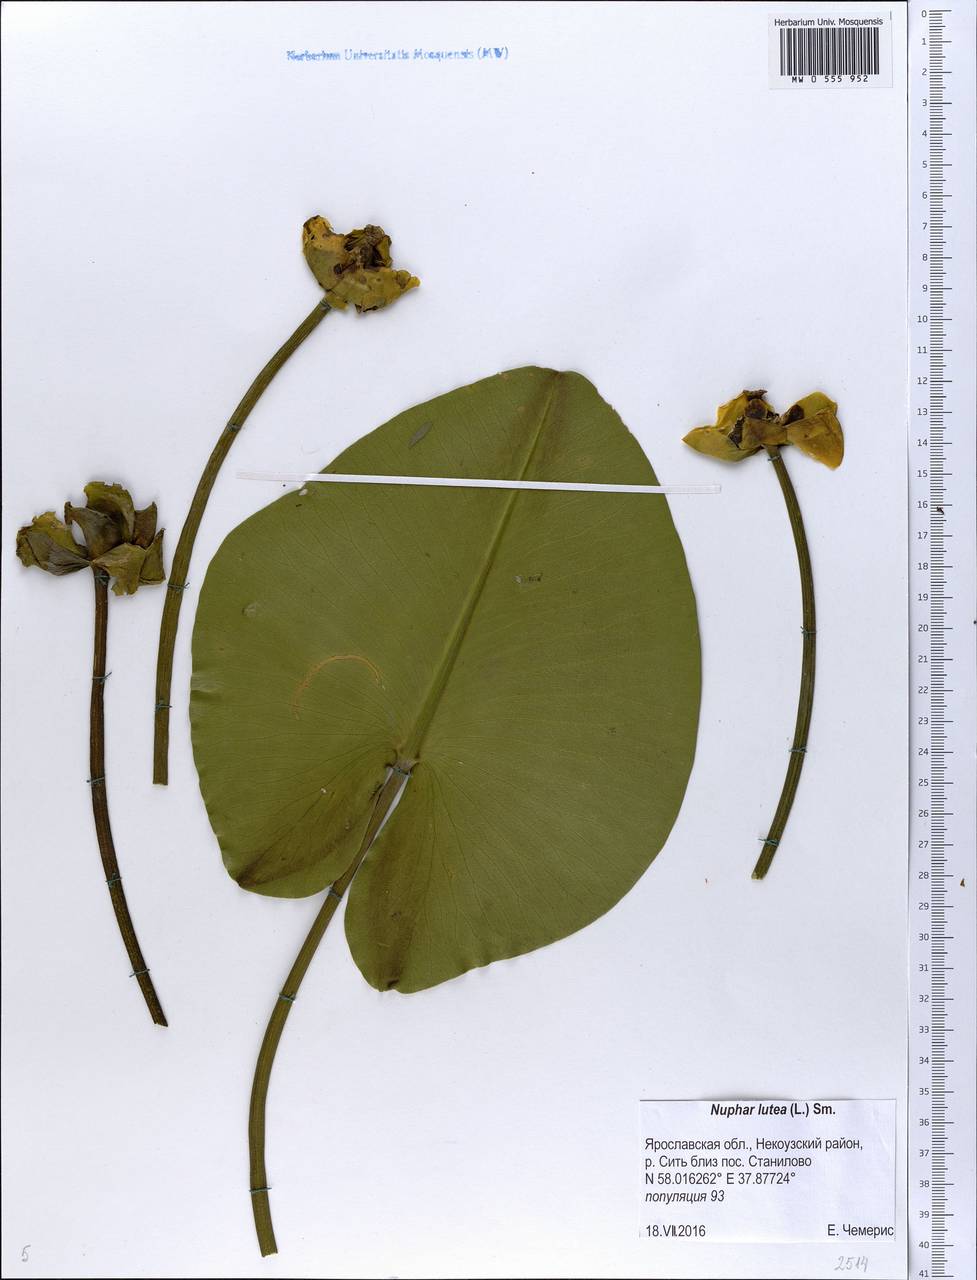 Nuphar lutea (L.) Sibth. & Sm., Eastern Europe, Central forest region (E5) (Russia)